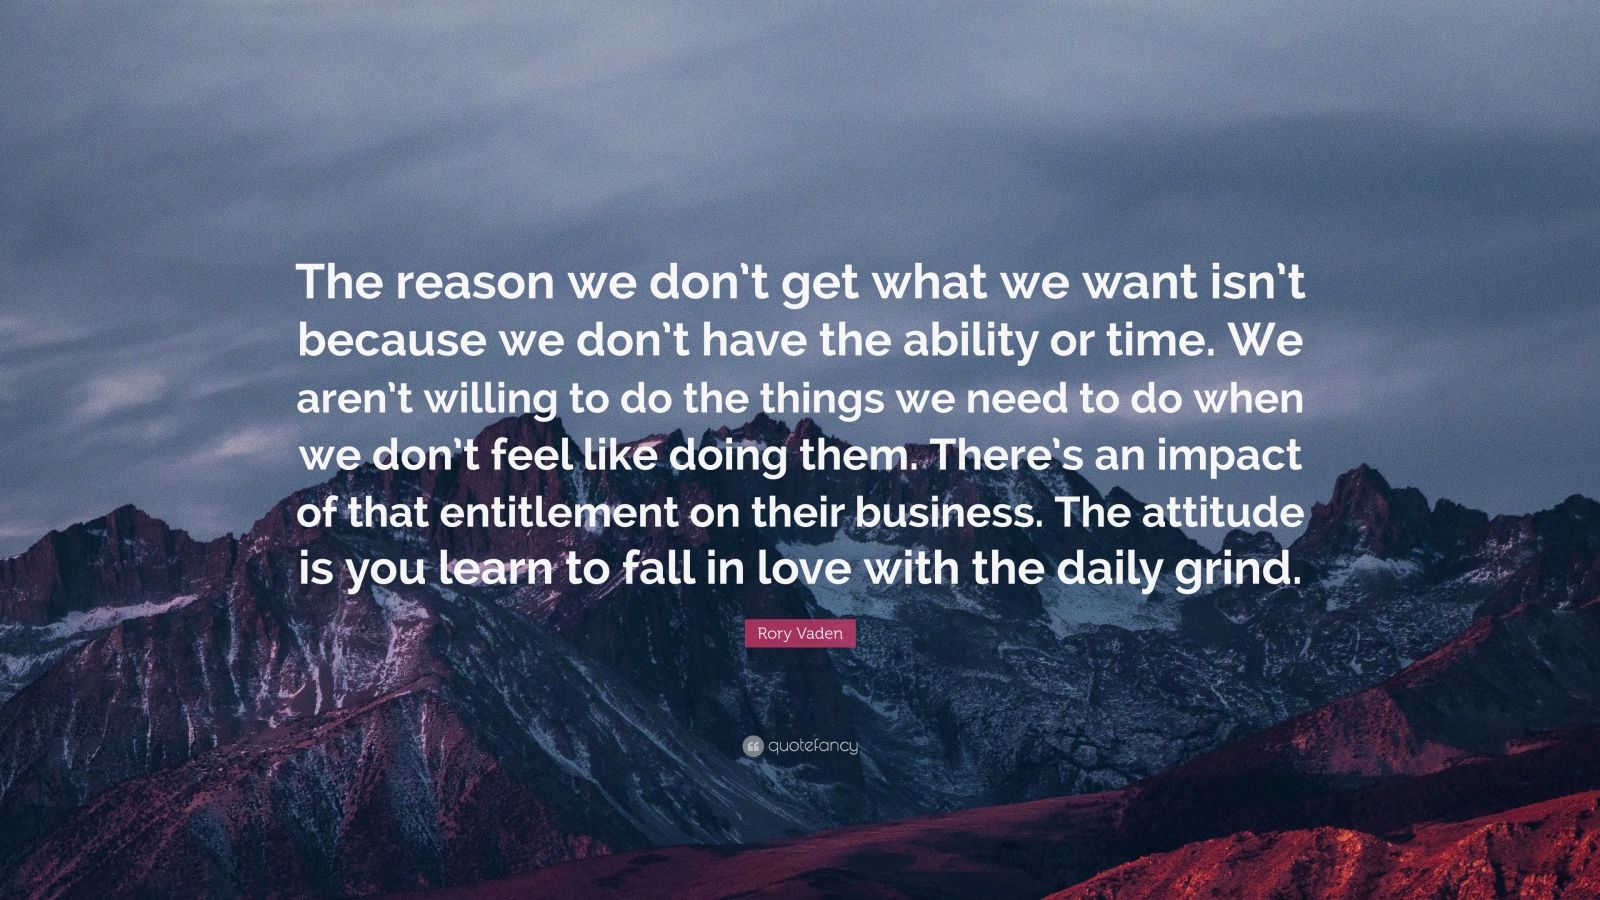 Rory Vaden Quote: “The reason we don’t get what we want isn’t because ...